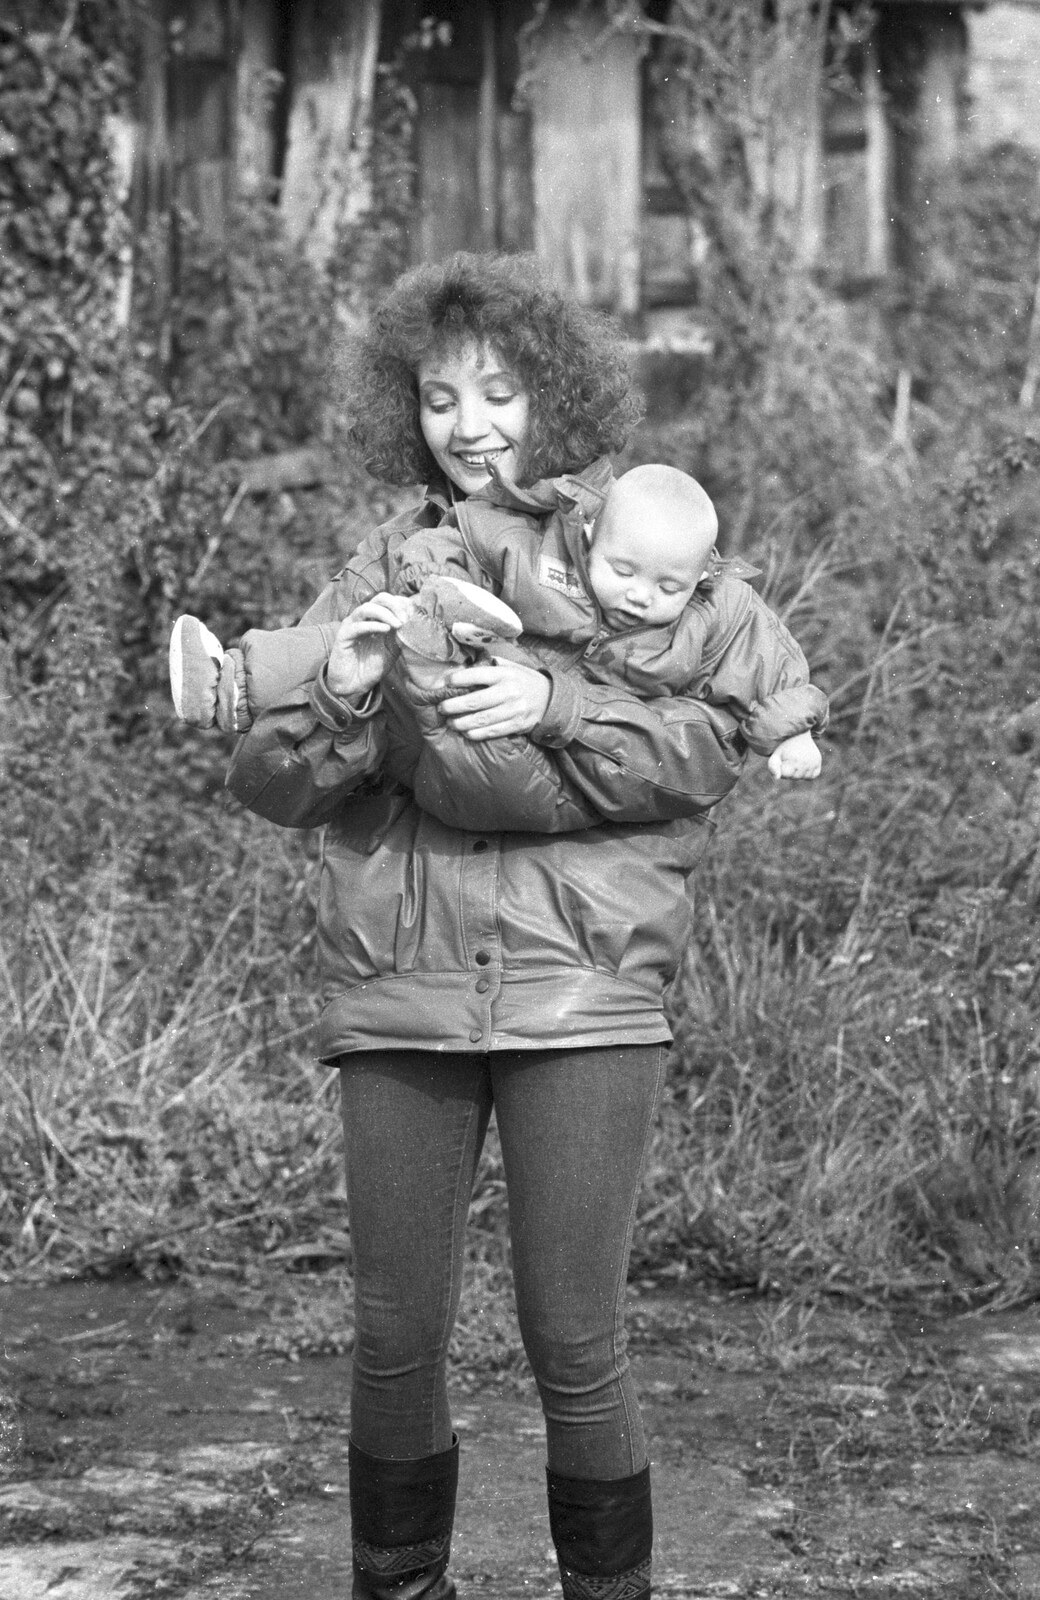 Monique scoops up the baby from Cider Making in Black and White, Stuston, Suffolk - 11th October 1992